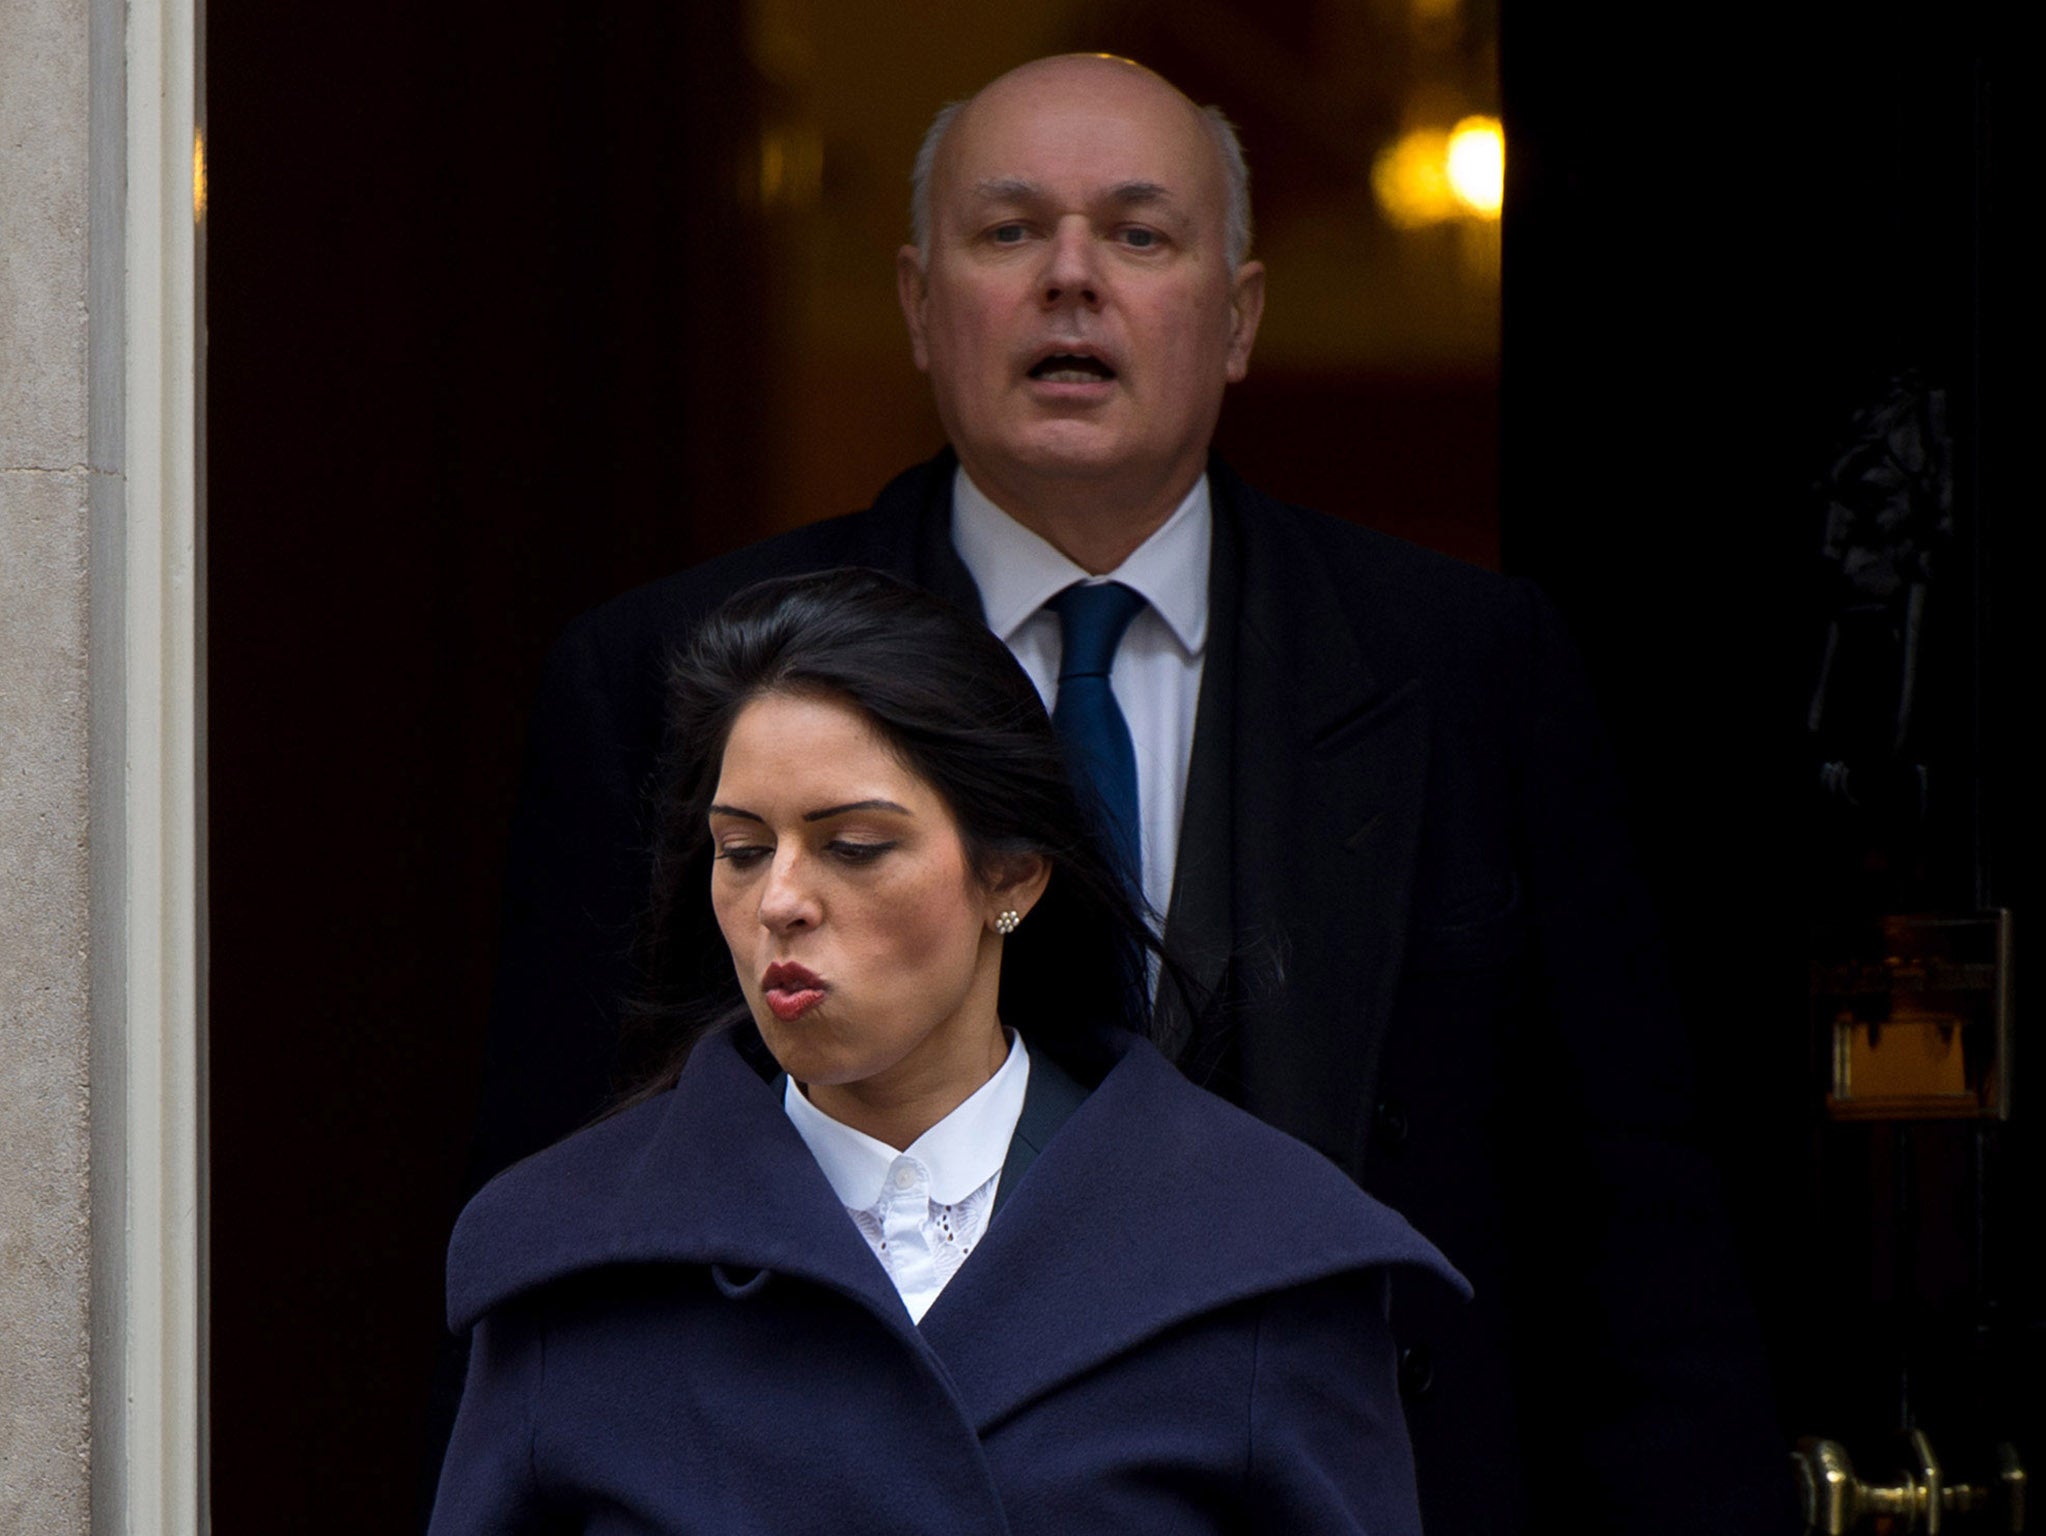 Priti Patel and Iain Duncan Smith, the former Work and Pensions Secretary